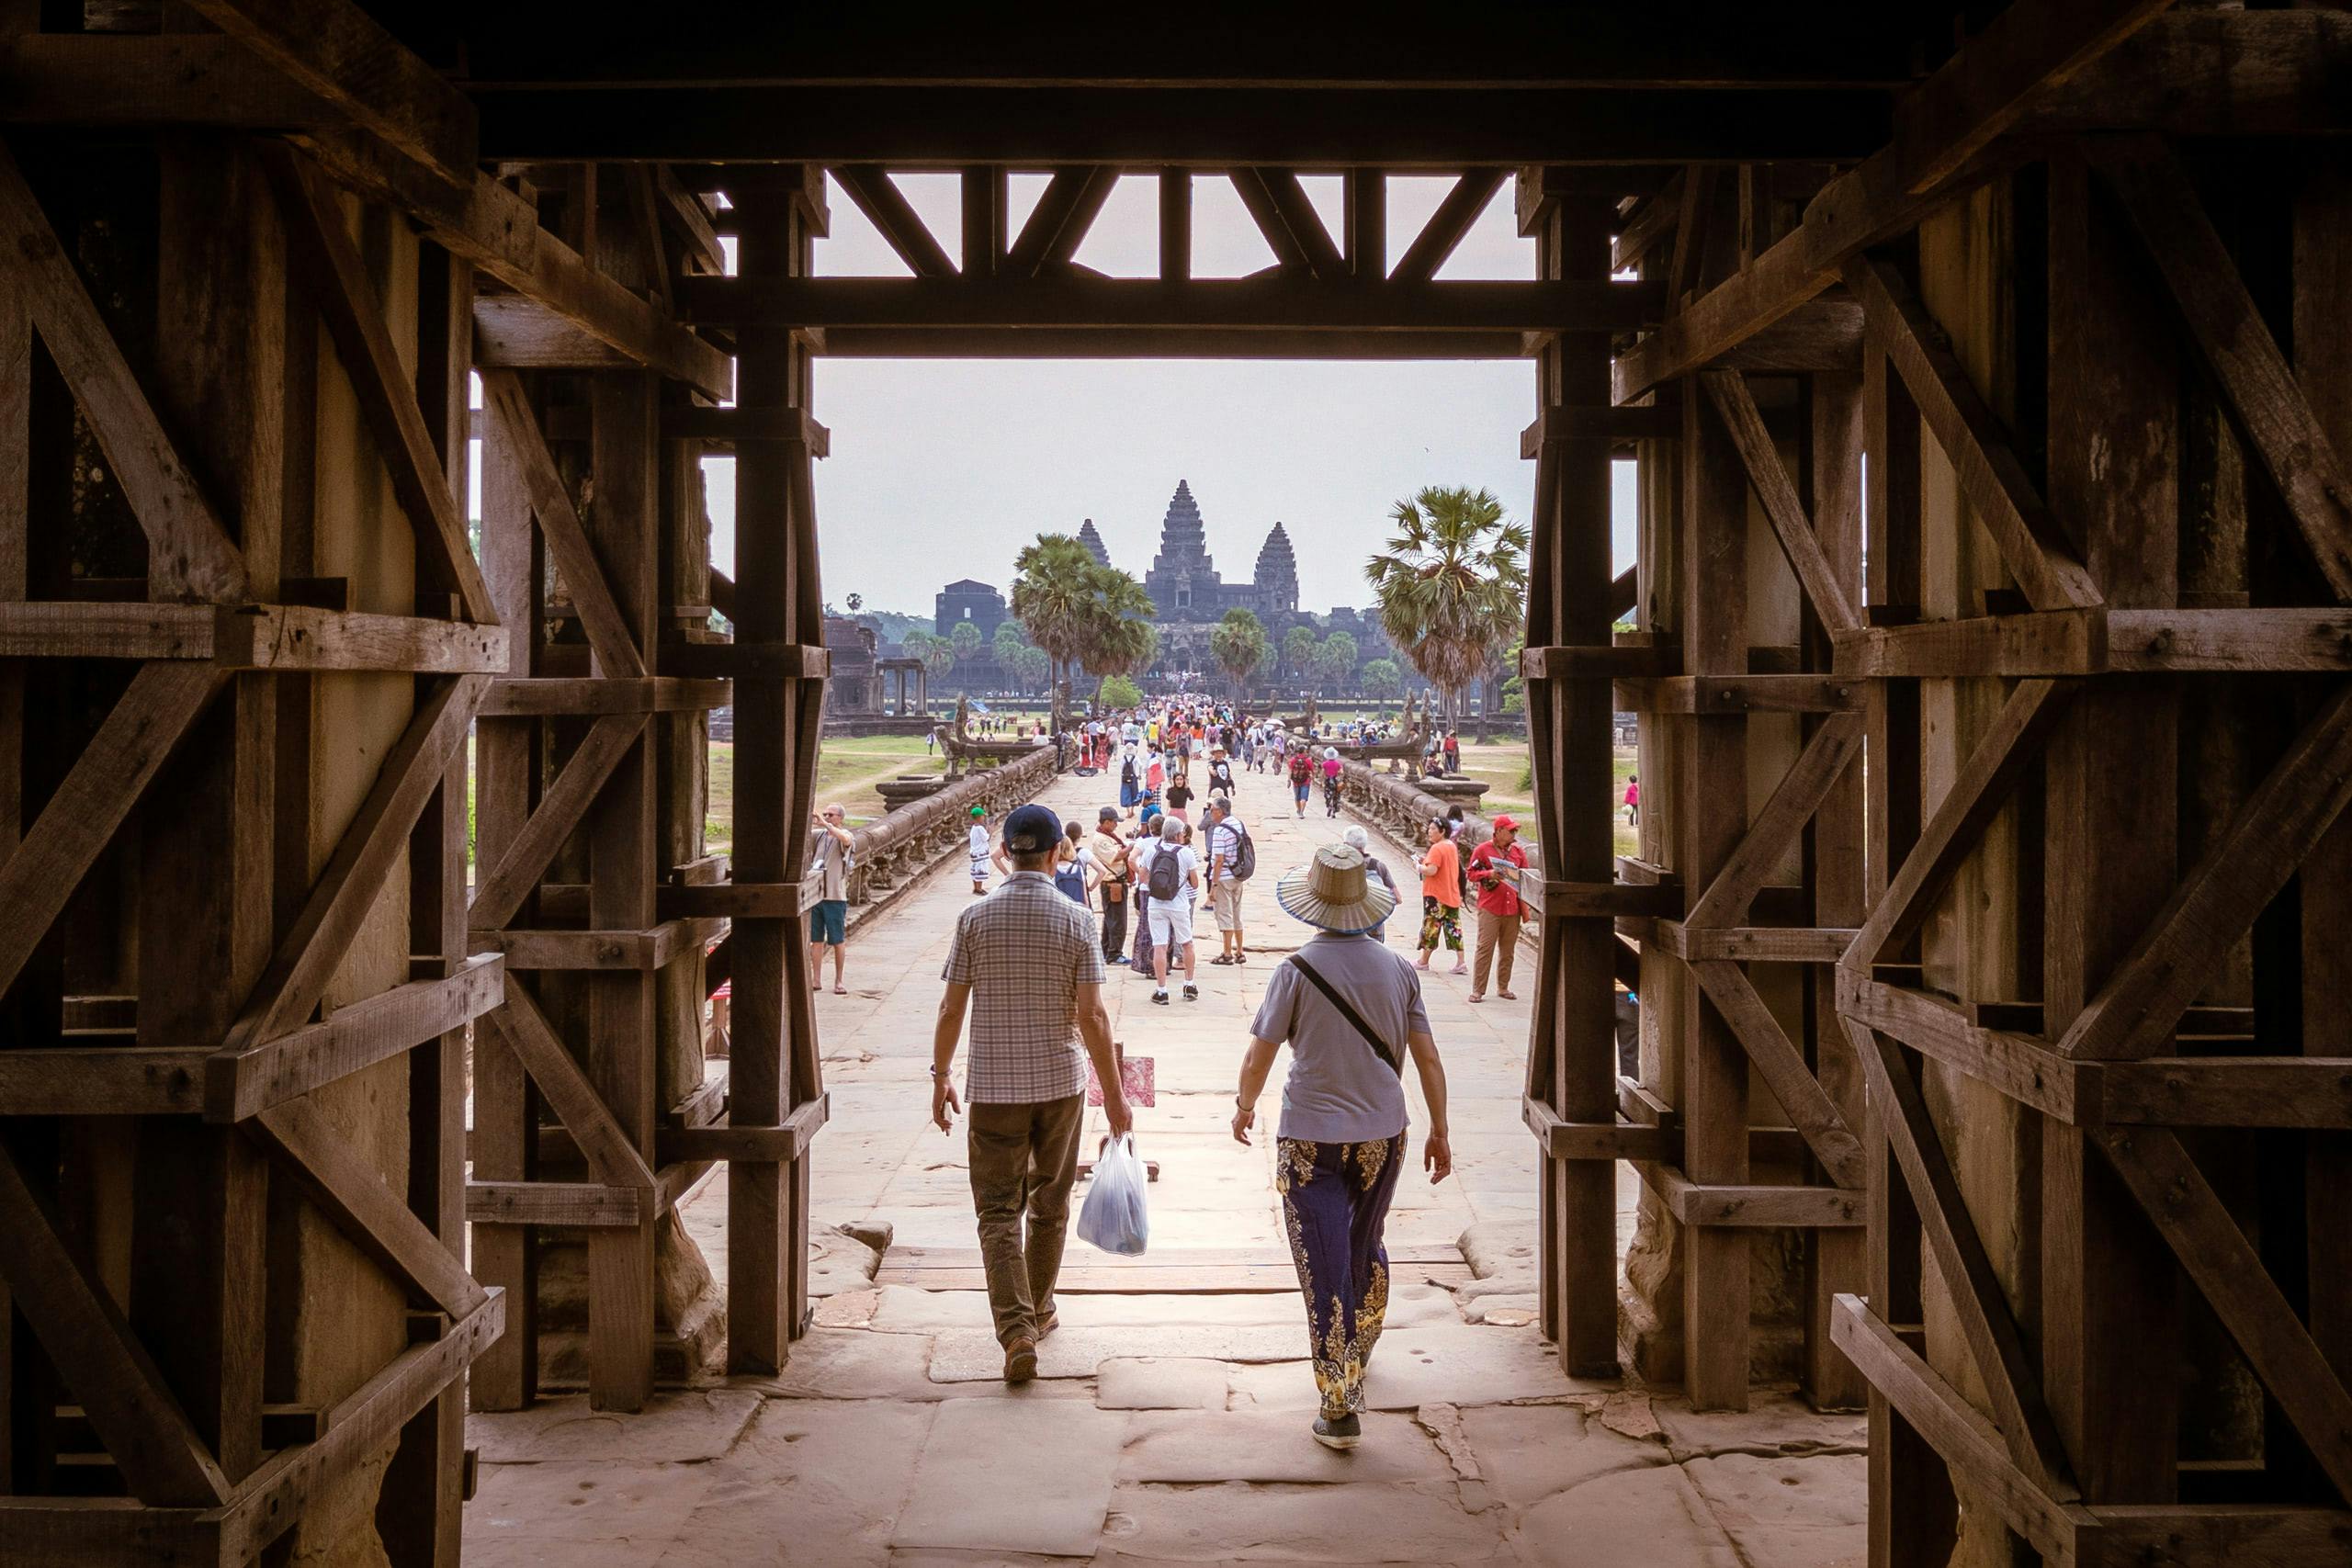 An entrance to Angkor Wat temple